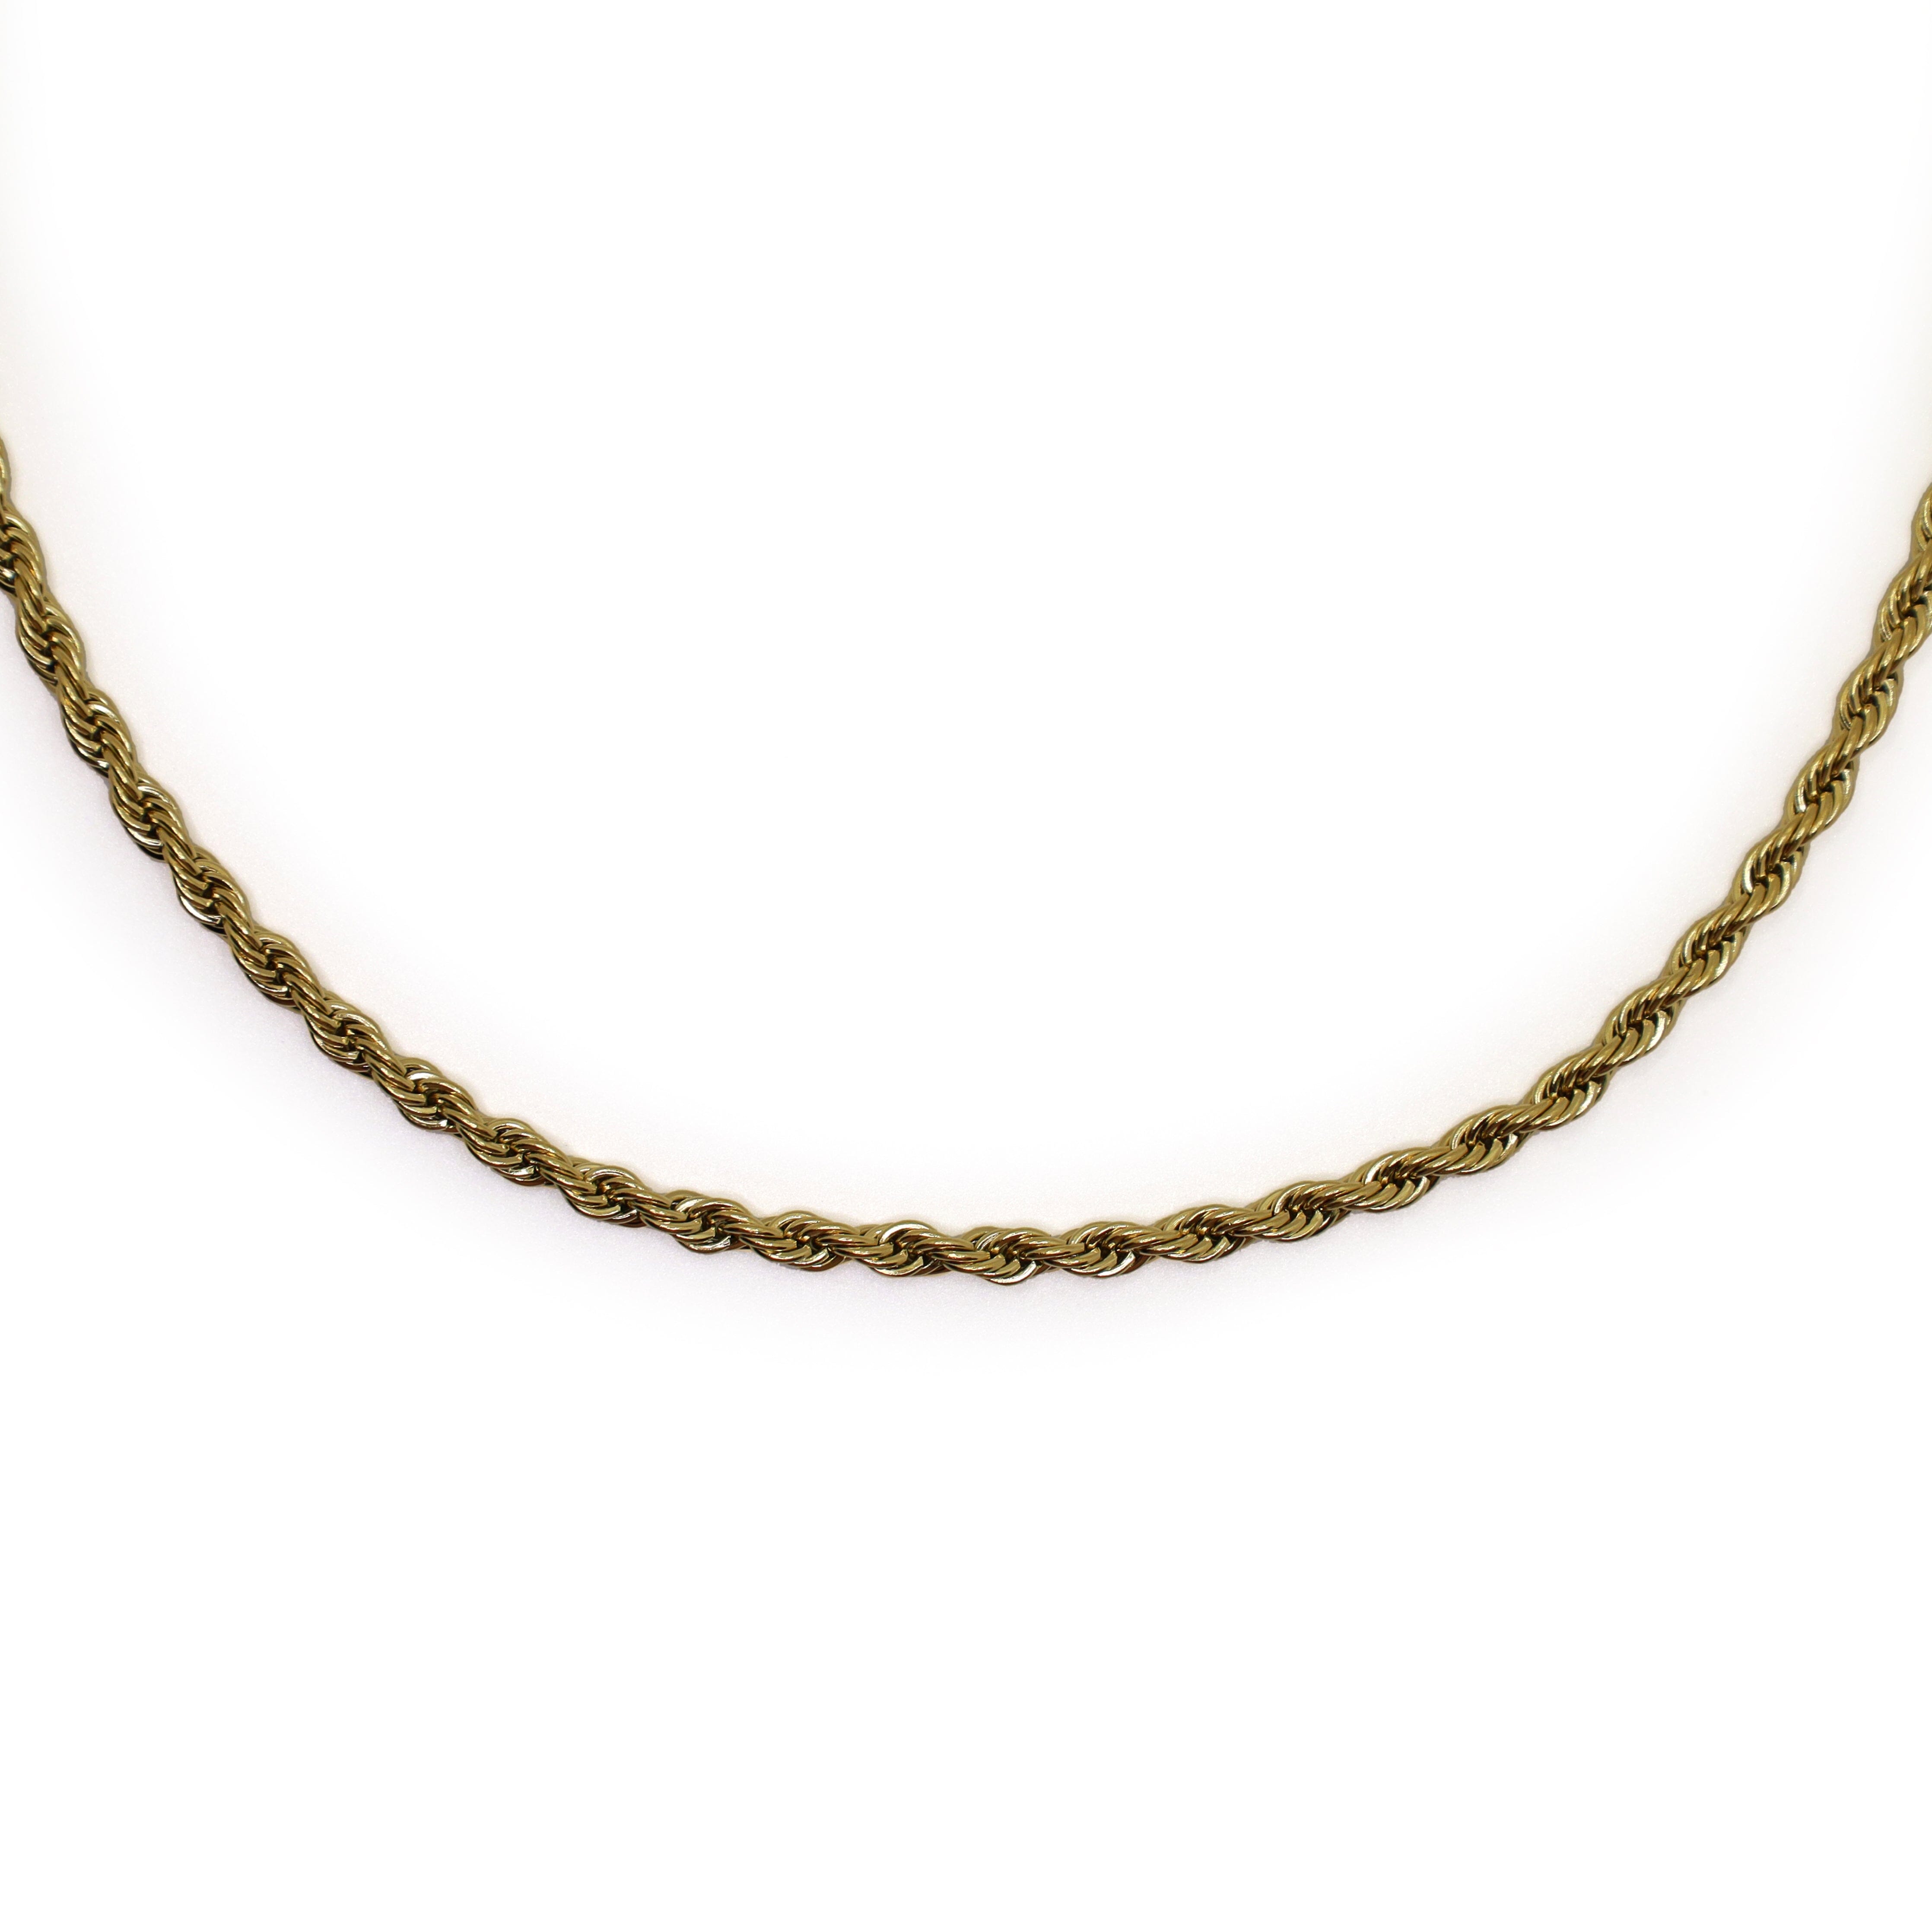 verrmae, narela necklace, 3mm rope chain necklace, verrmae, necklaces, 18k gold plated jewellery, 18k gold plated necklace, 18k gold plated stainless steel, 18k gold plated, waterproof jewellery, vintage inspired jewellery, jewellery melbourne, jewellery, everyday jewellery, gold jewellery, gold necklace, gold plated necklace, gold plated jewellery, jewellery australia